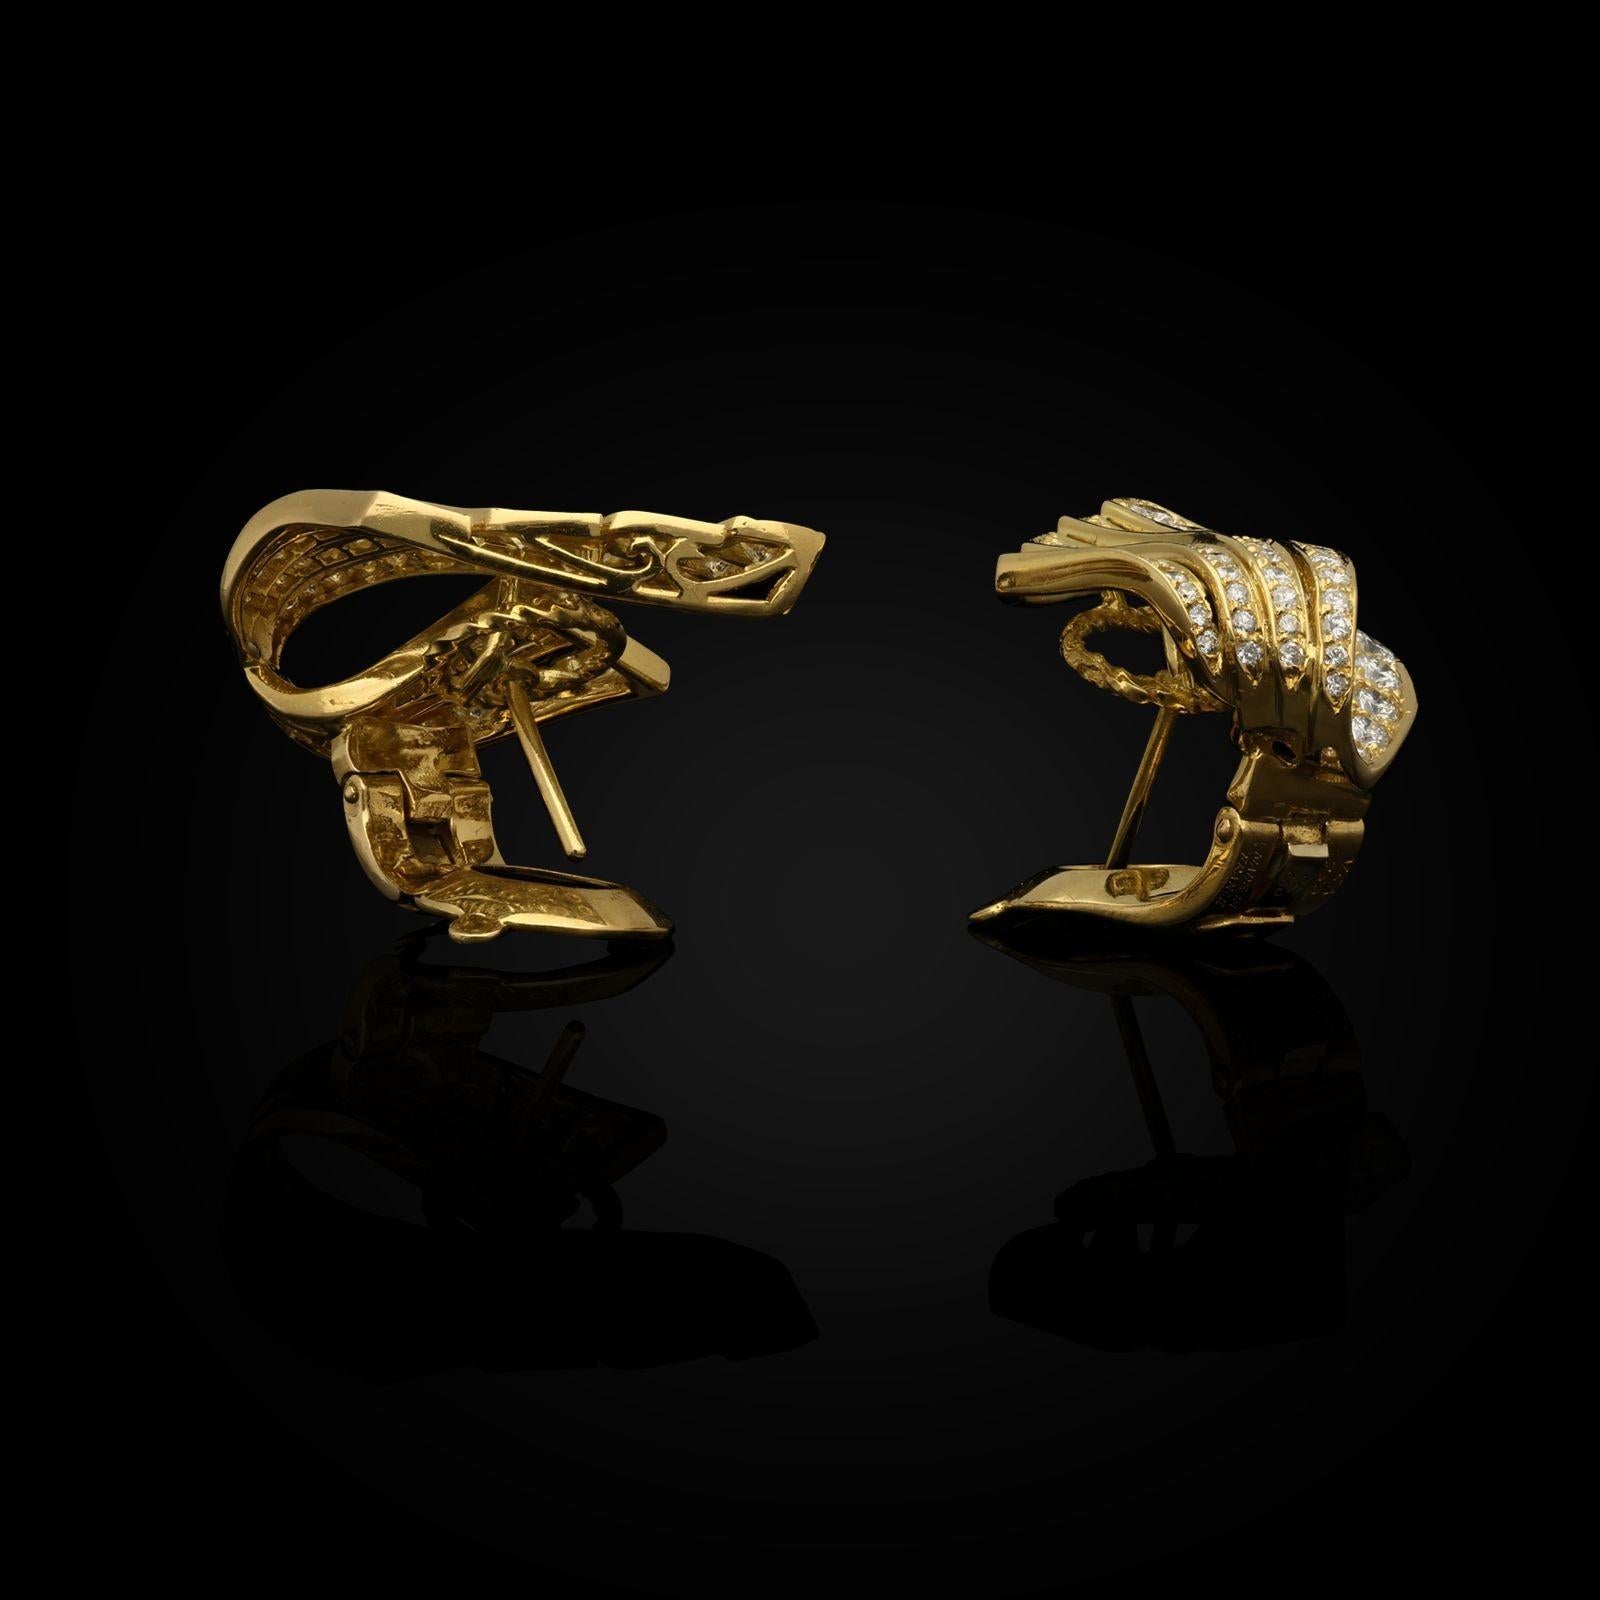 A stylish pair of 18ct yellow gold and diamond earrings by Van Cleef & Arpels c.1990s, designed as a three-dimensional stylised wing with a flared shape pointed at the top tapering towards the base which curls under and behind, offset to one side,